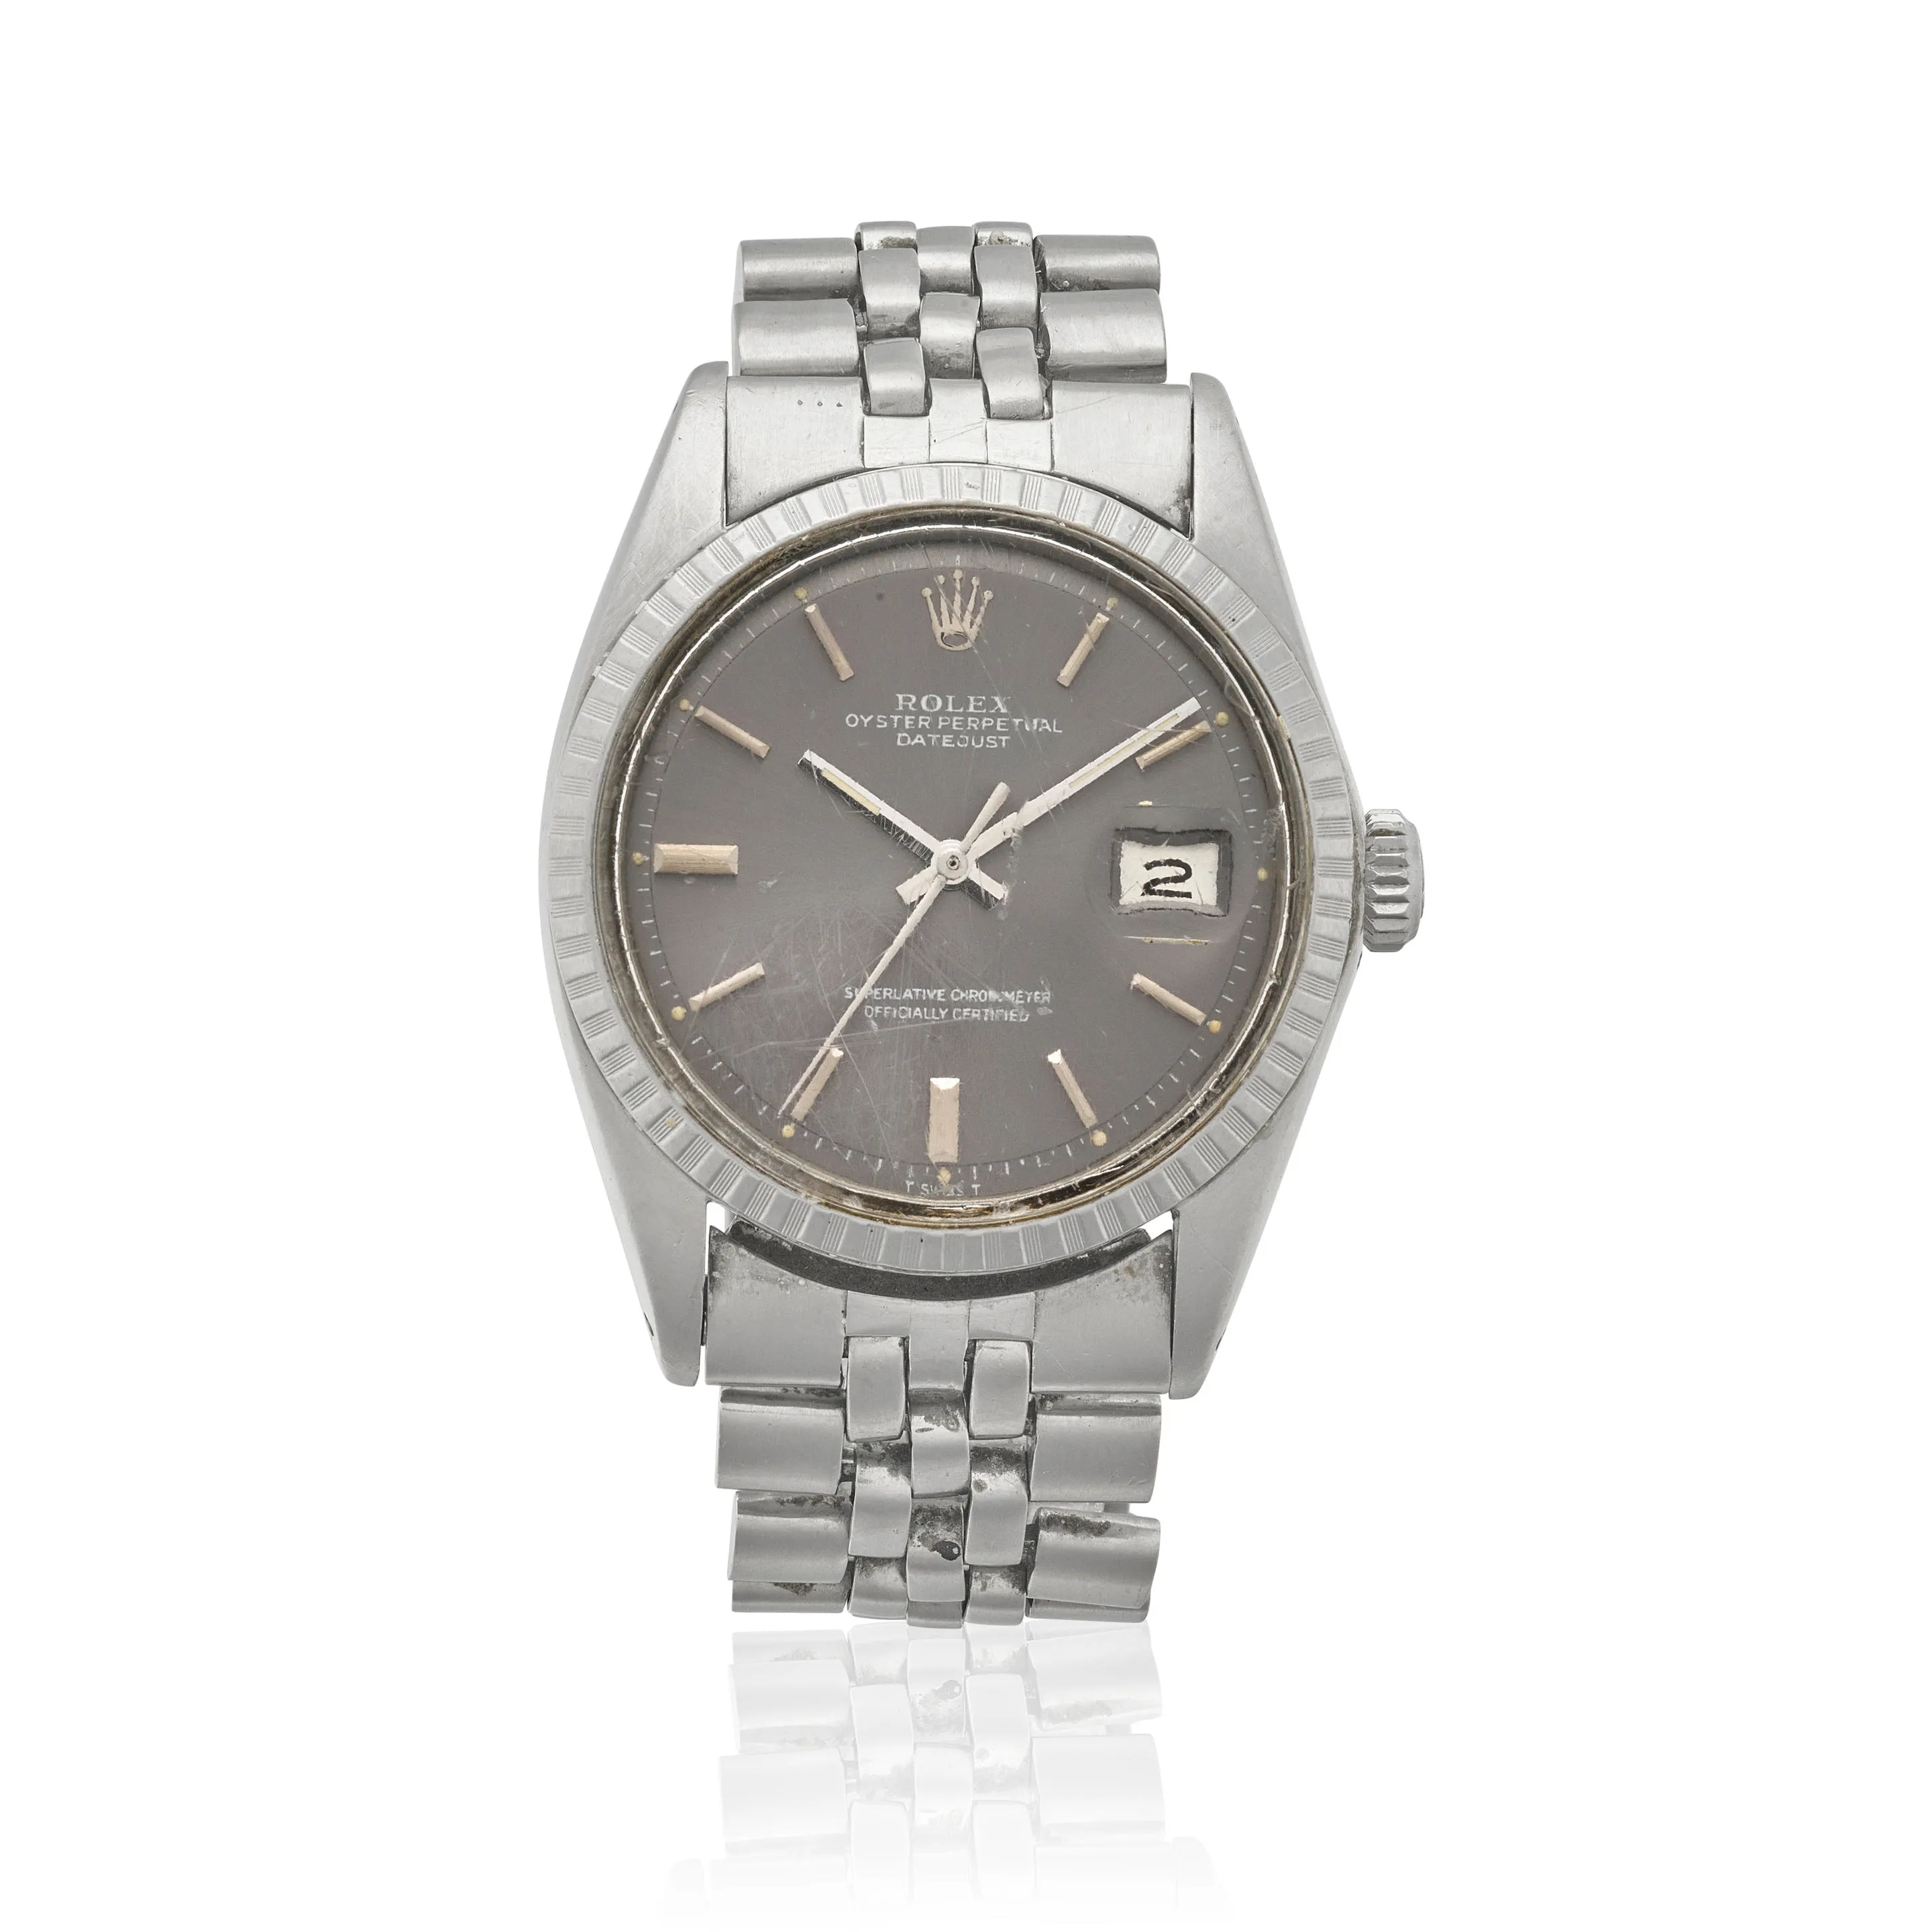 Rolex Datejust 1603 35mm Stainless steel Gray